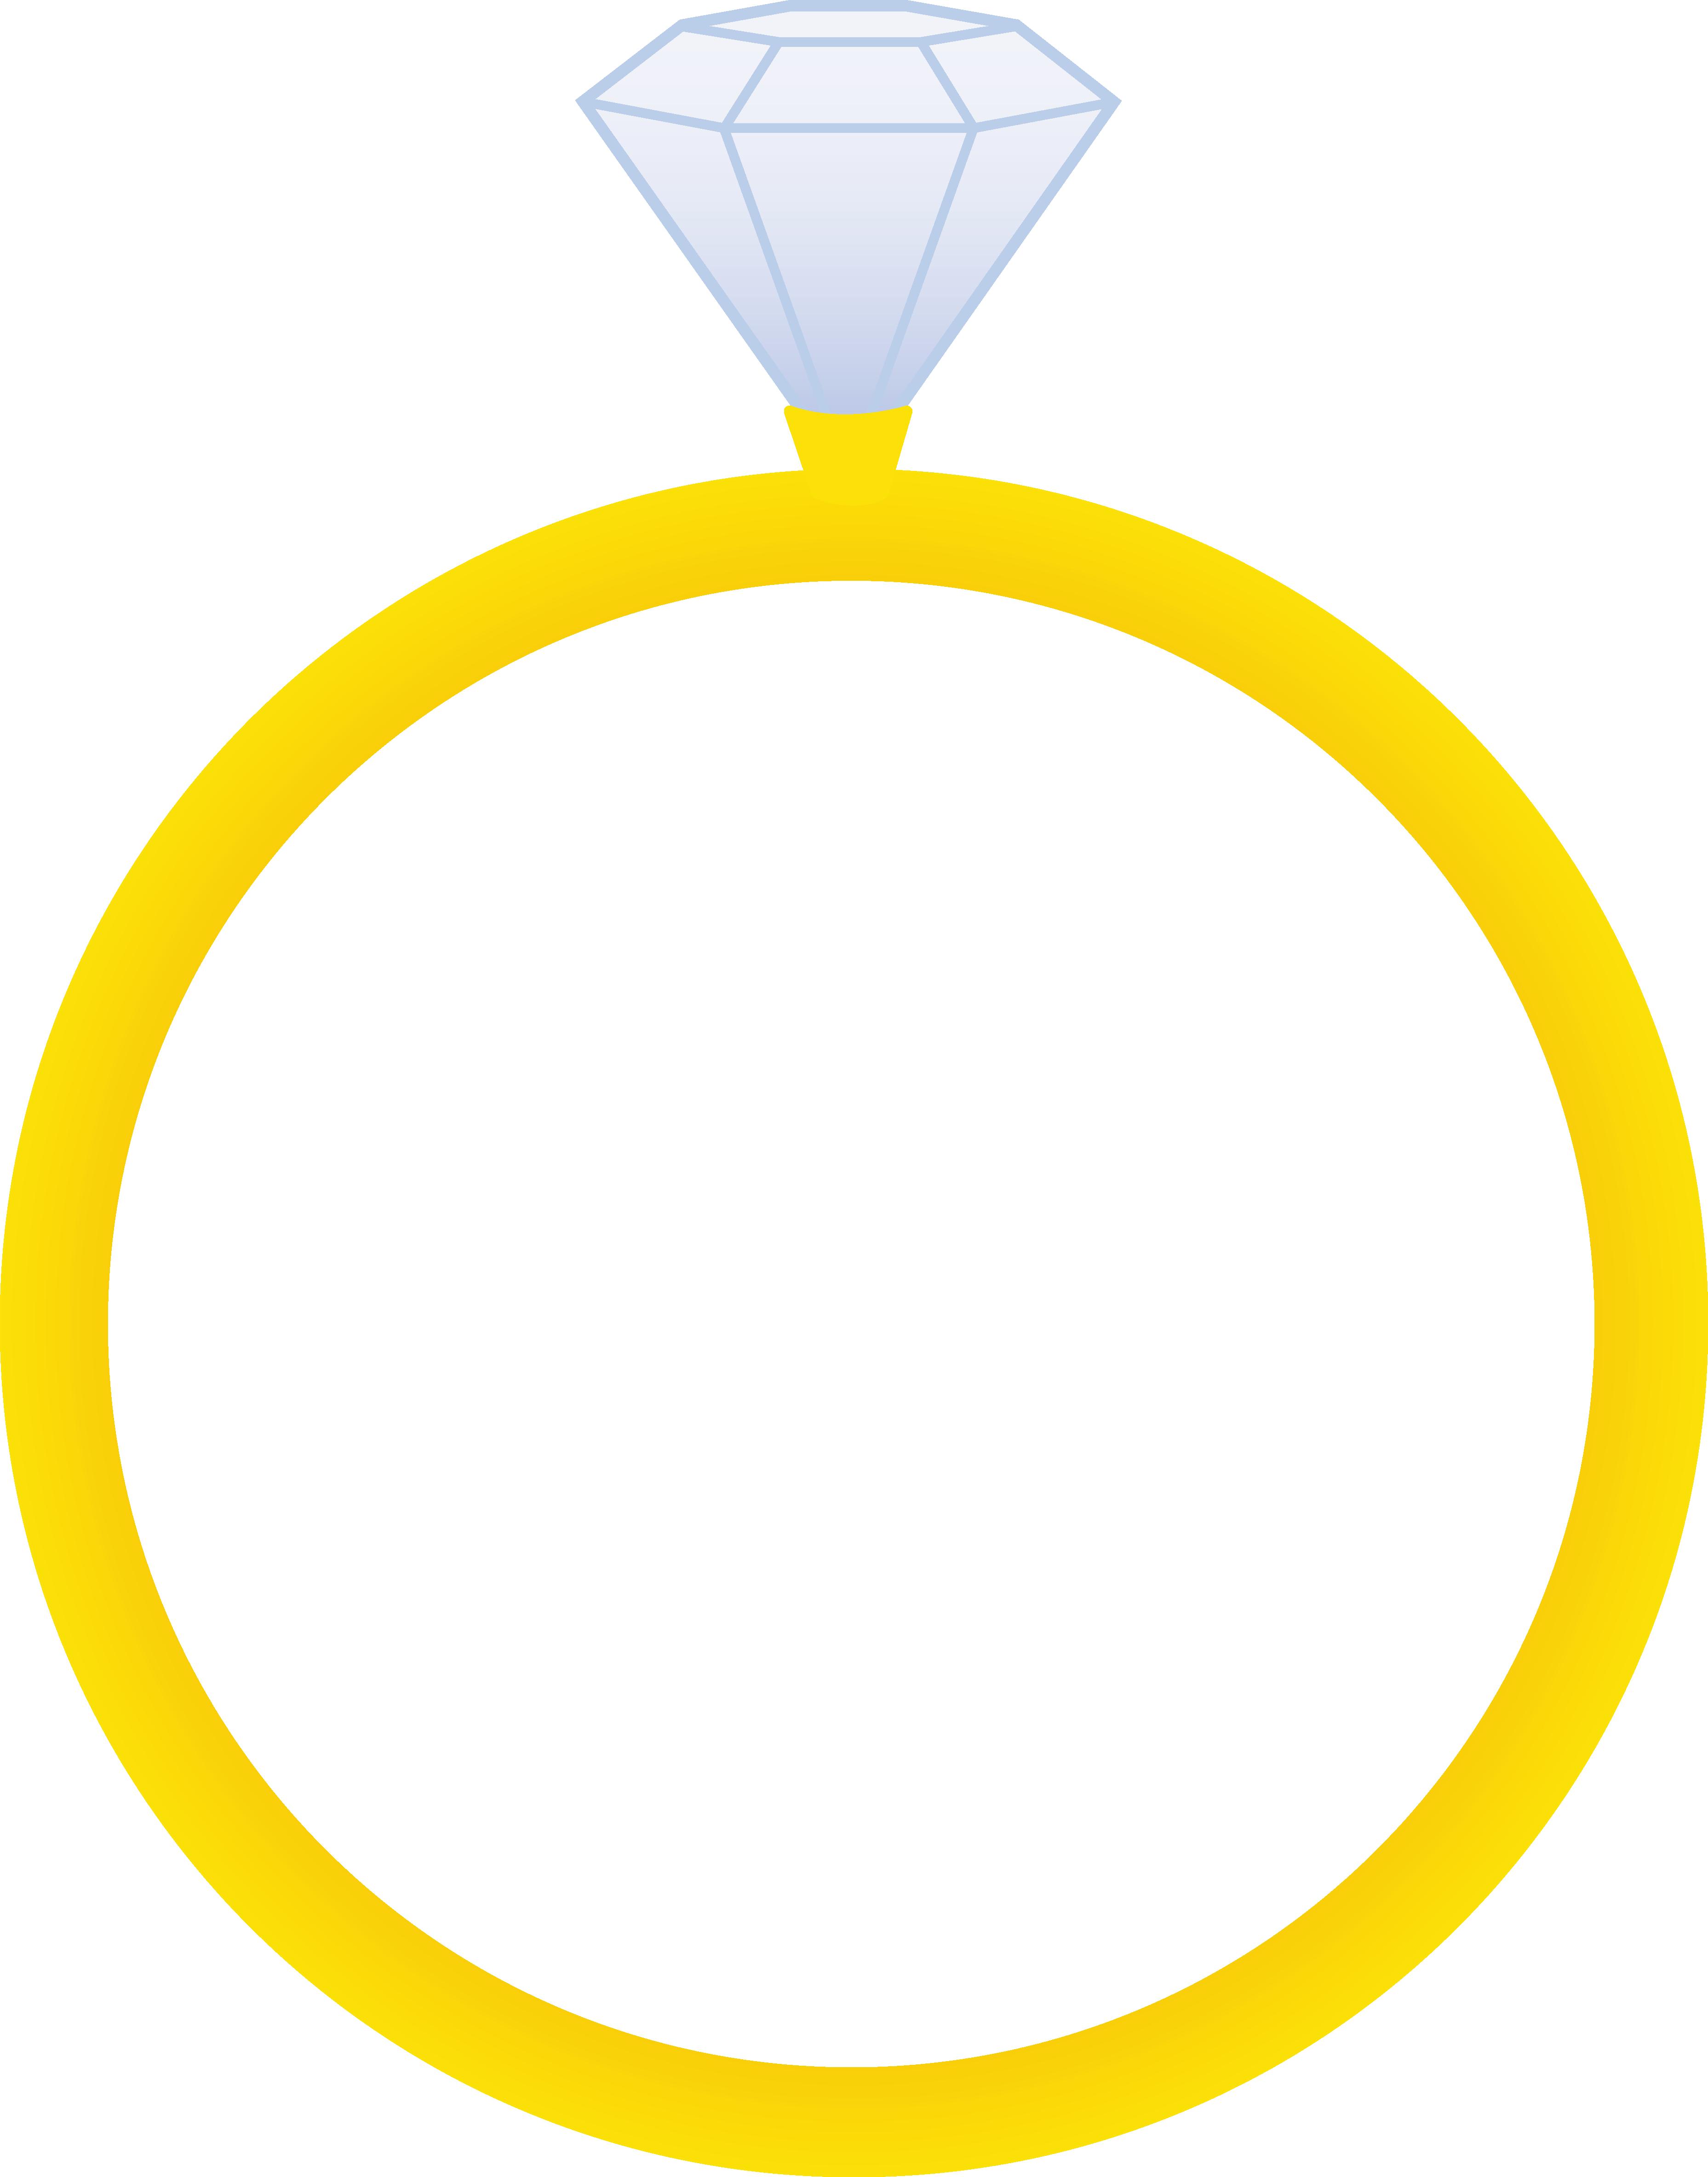 ring clipart image - photo #26